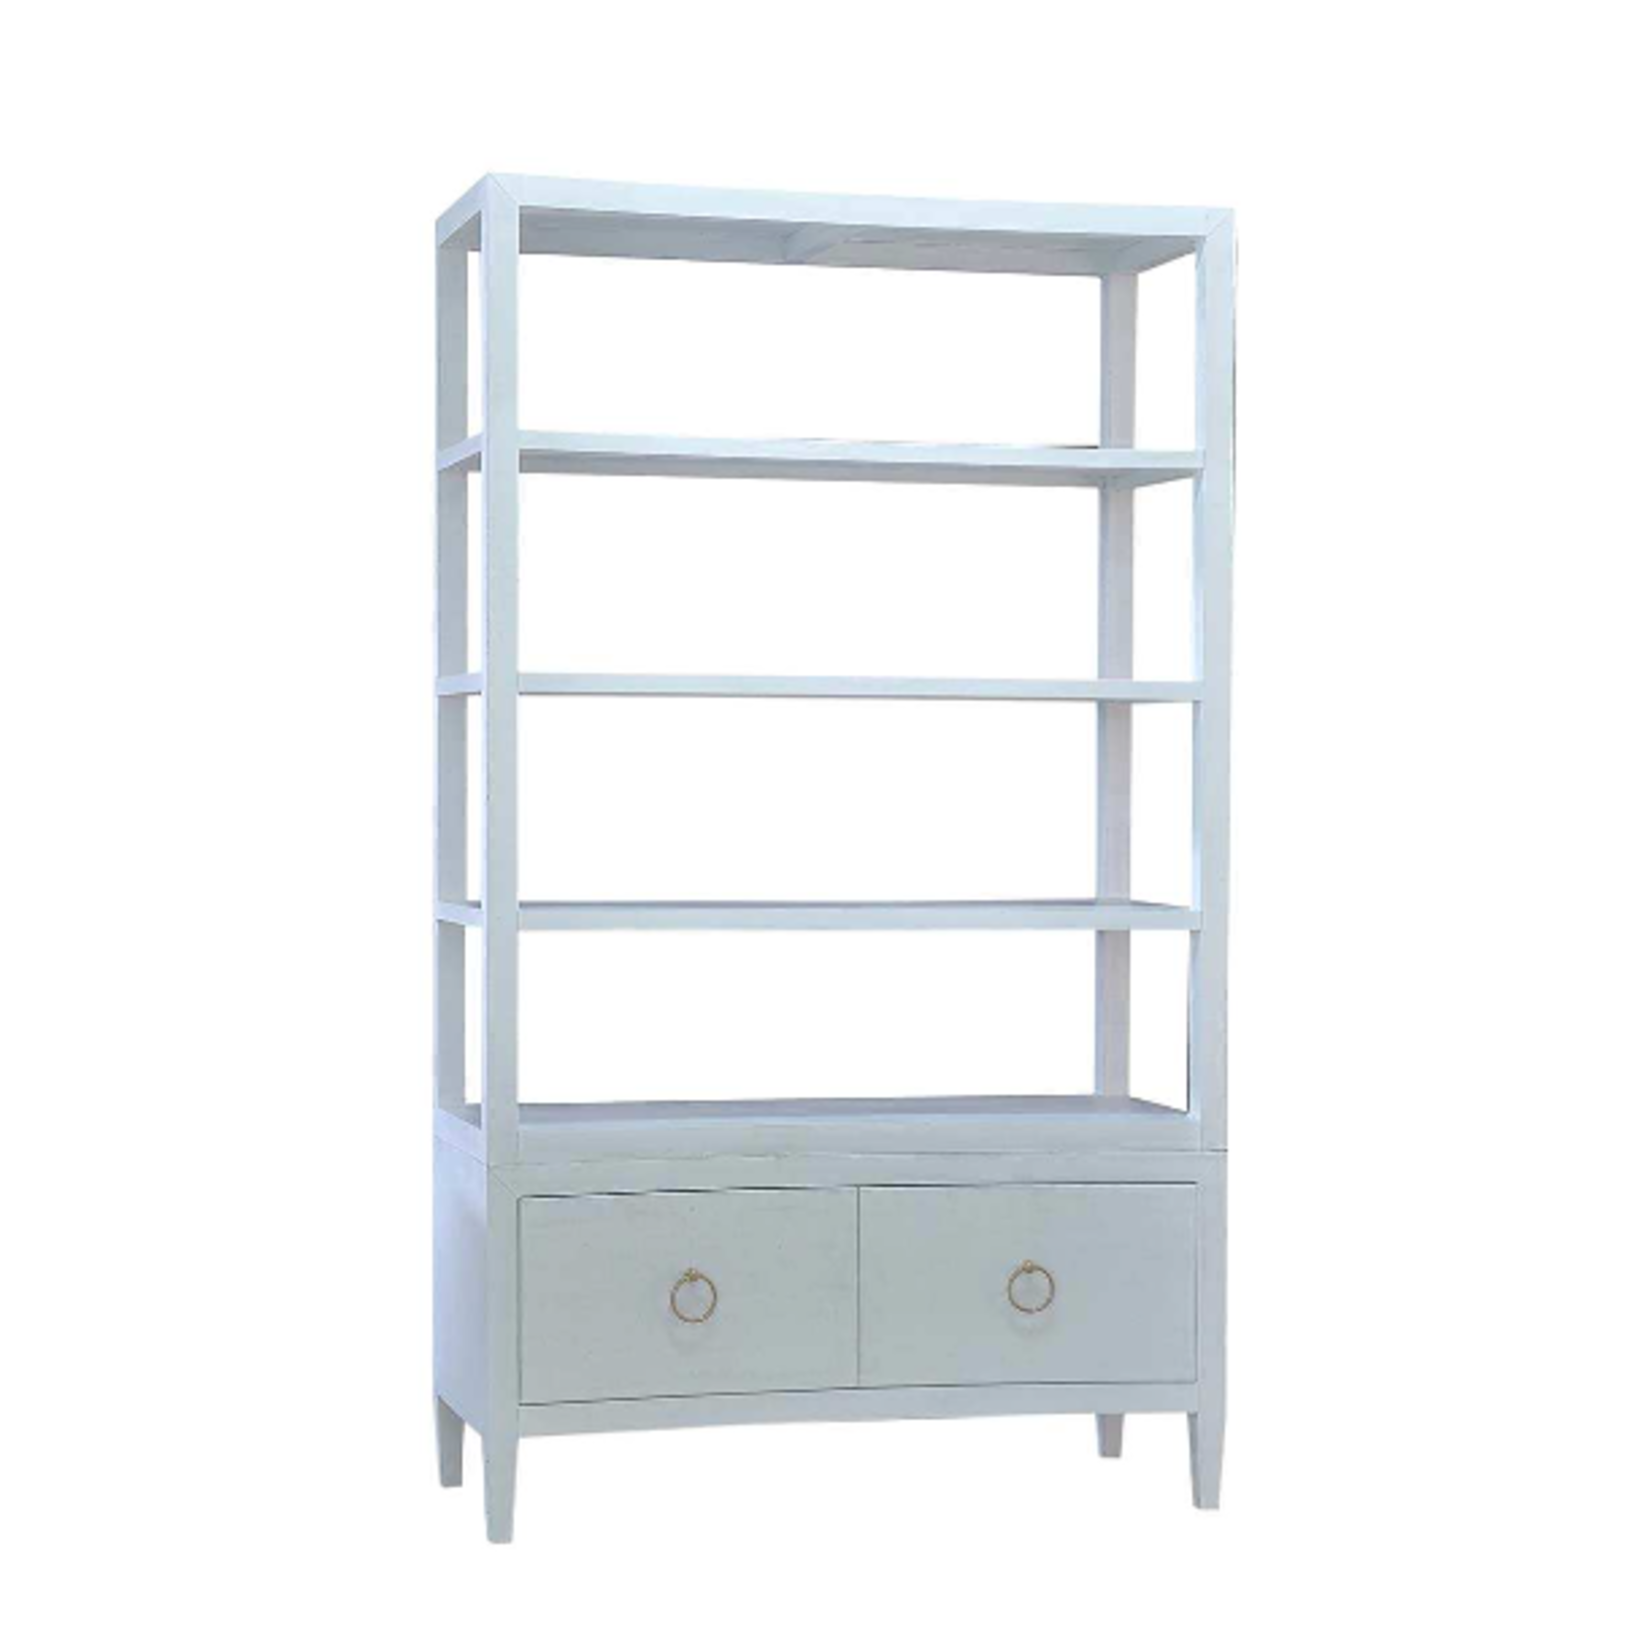 Outside The Box 48x21x82 Westminster White Linen Wrapped Concave Shelving Unit In Dove White